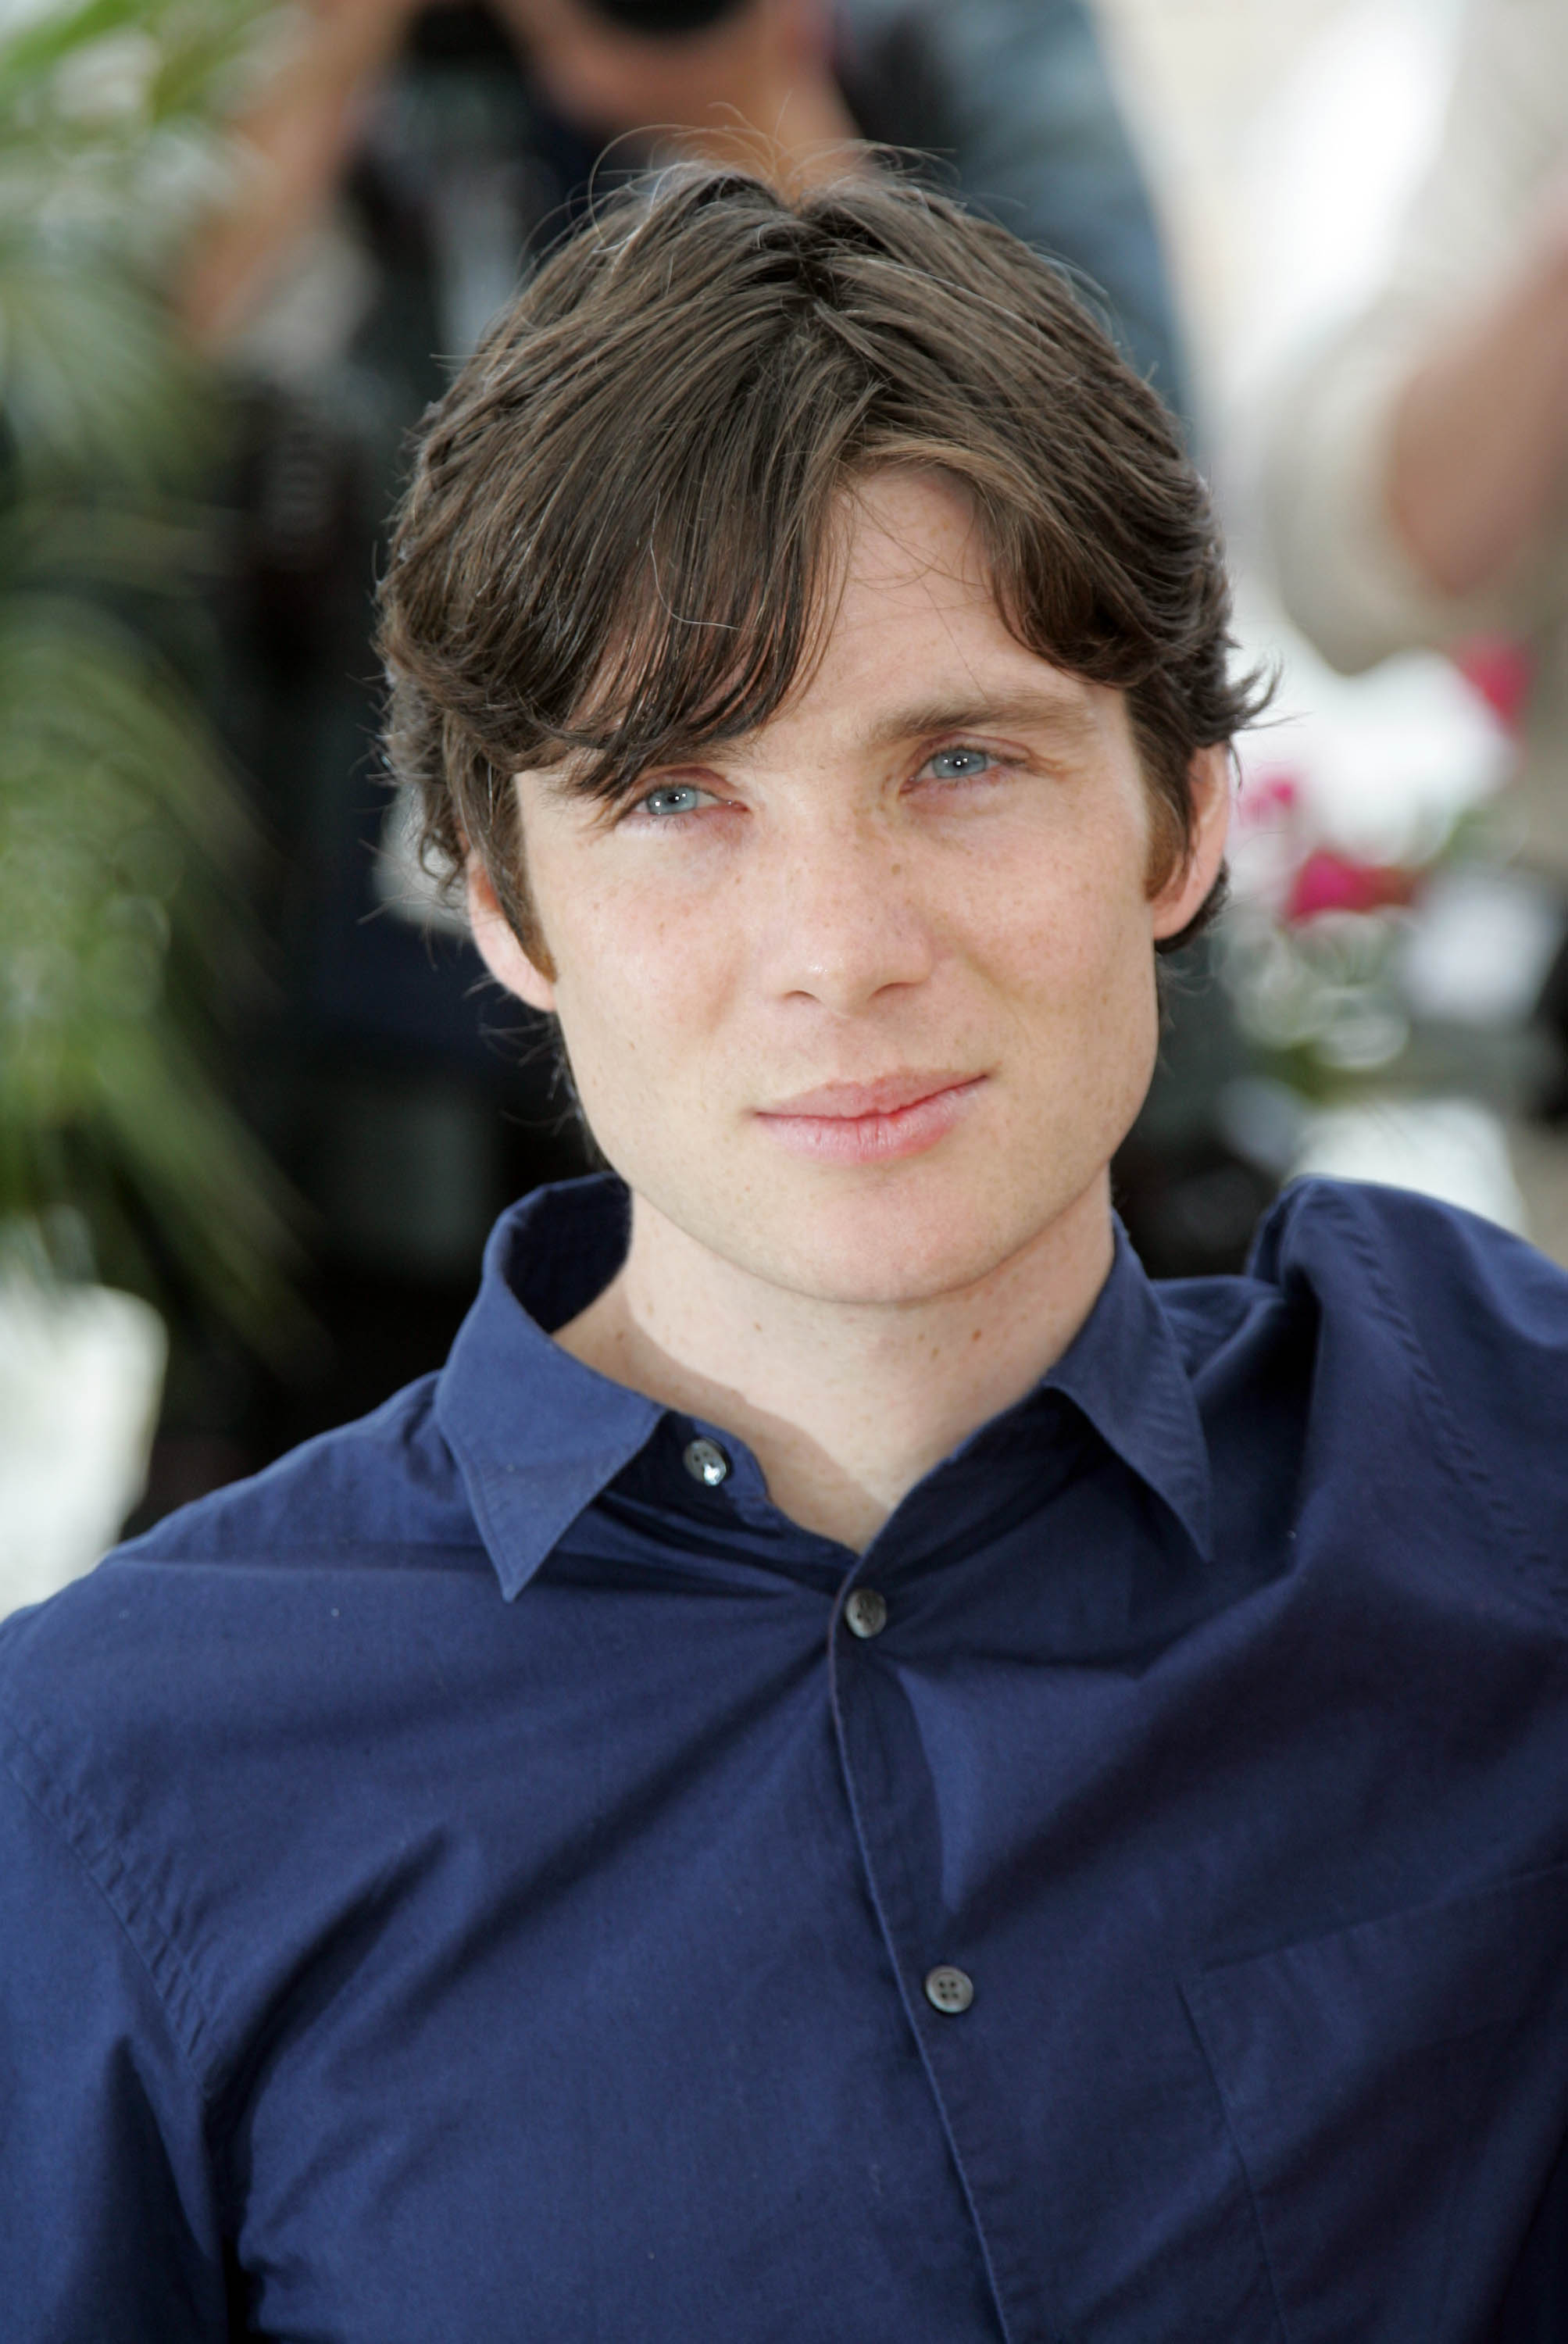 Cillian Murphy during a photocall for "The Wind That Shakes the Barley"on May 18, 2006 | Source: Getty Images